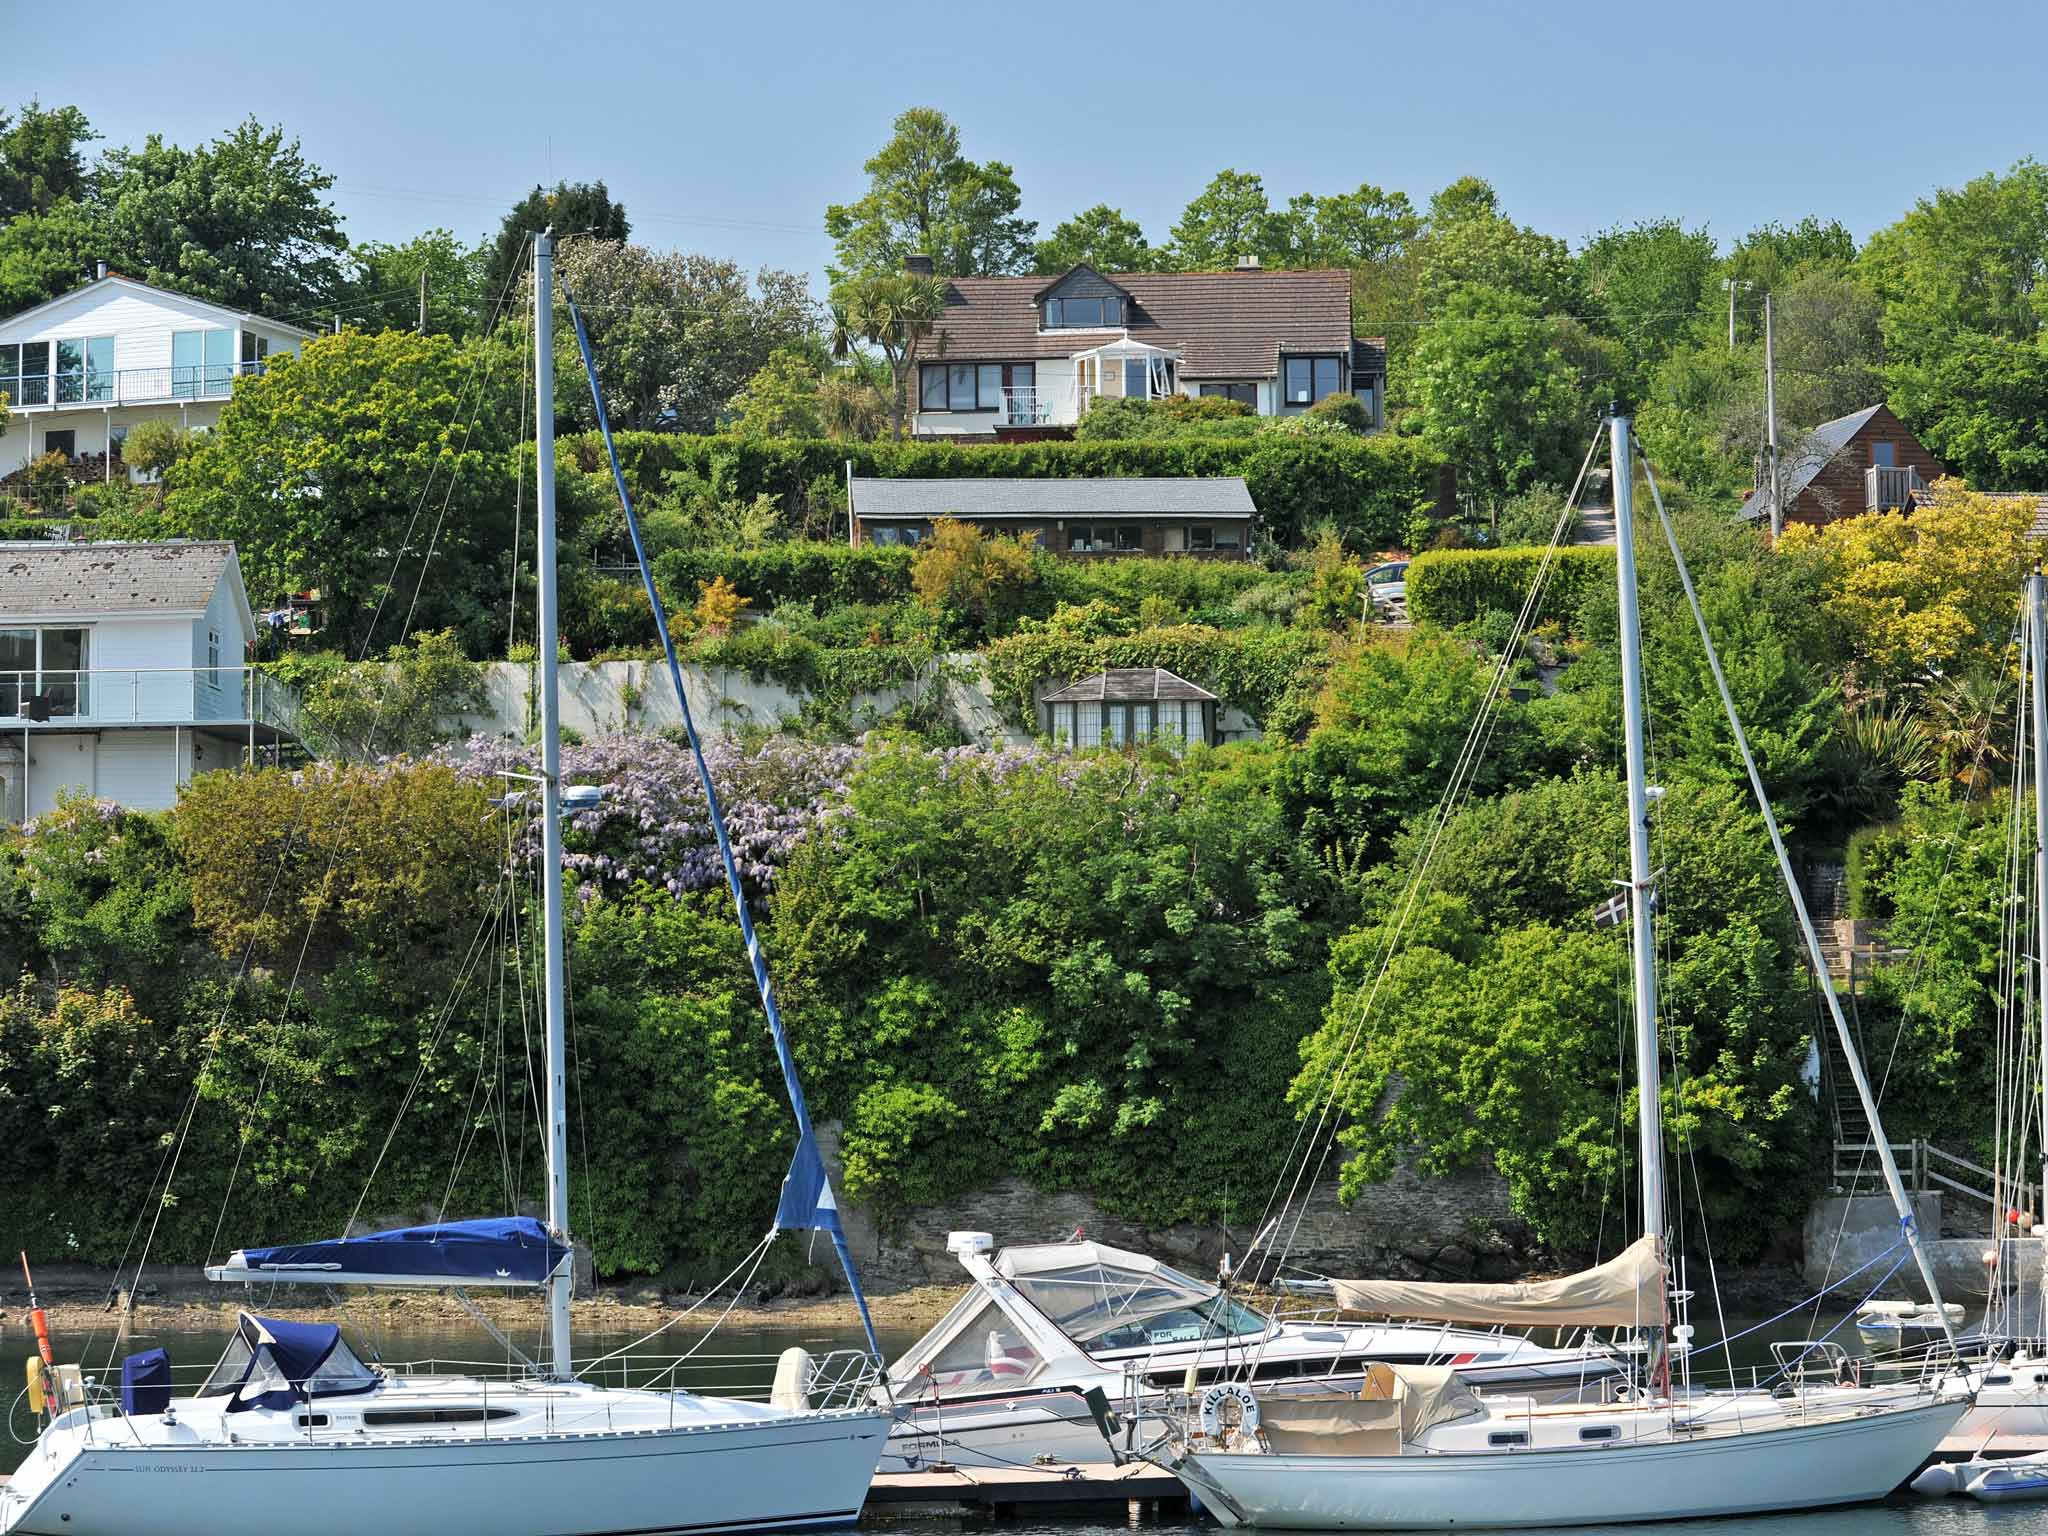 Roselaw, Mixtow, Nr Fowey, Cornwall. On with Knight Frank for offers in the region of £595,000